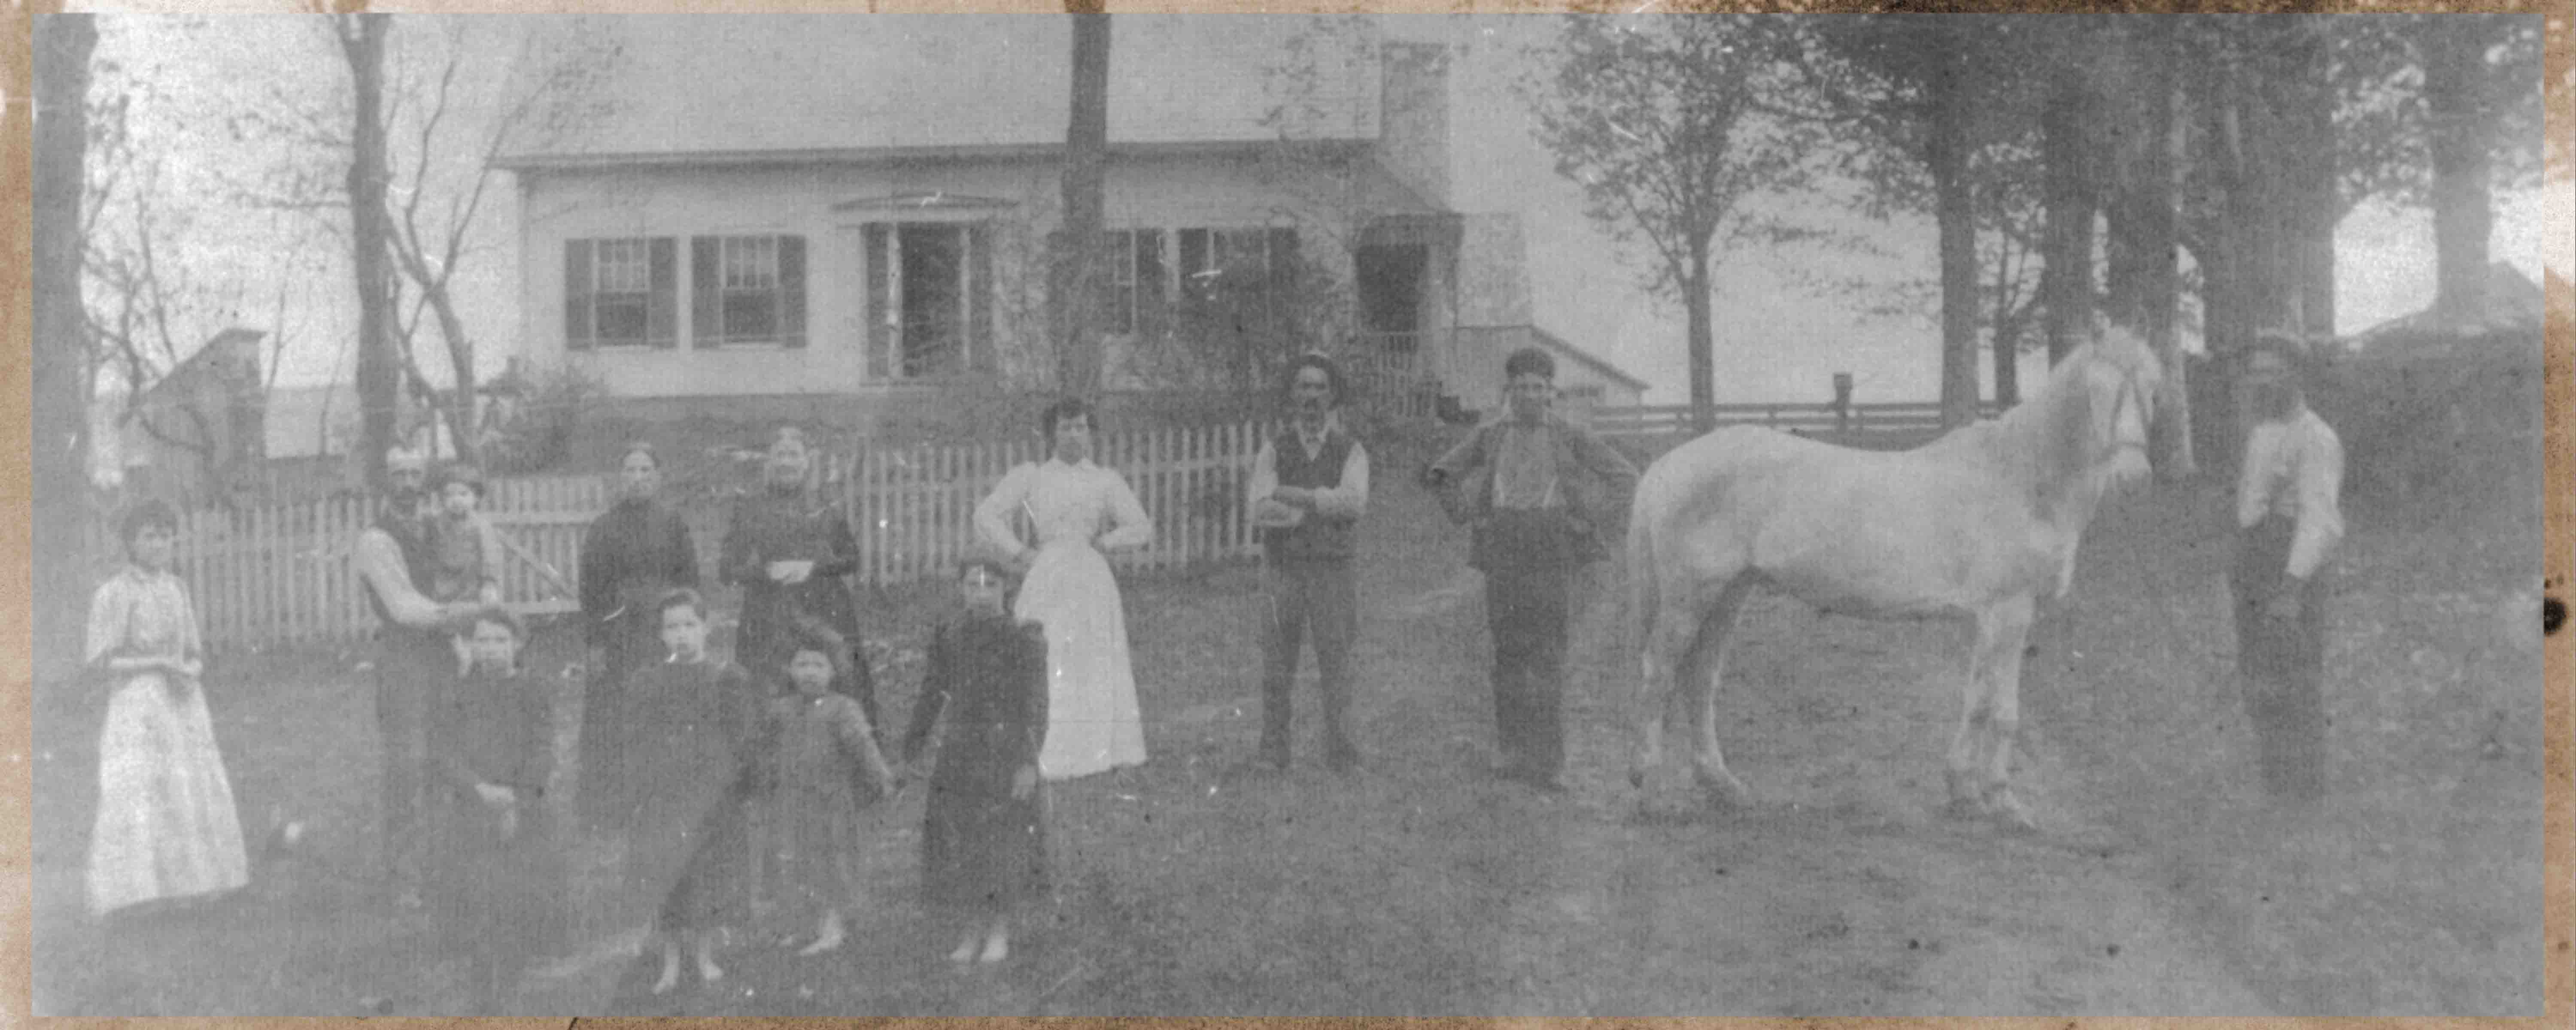 Our Family in 1882